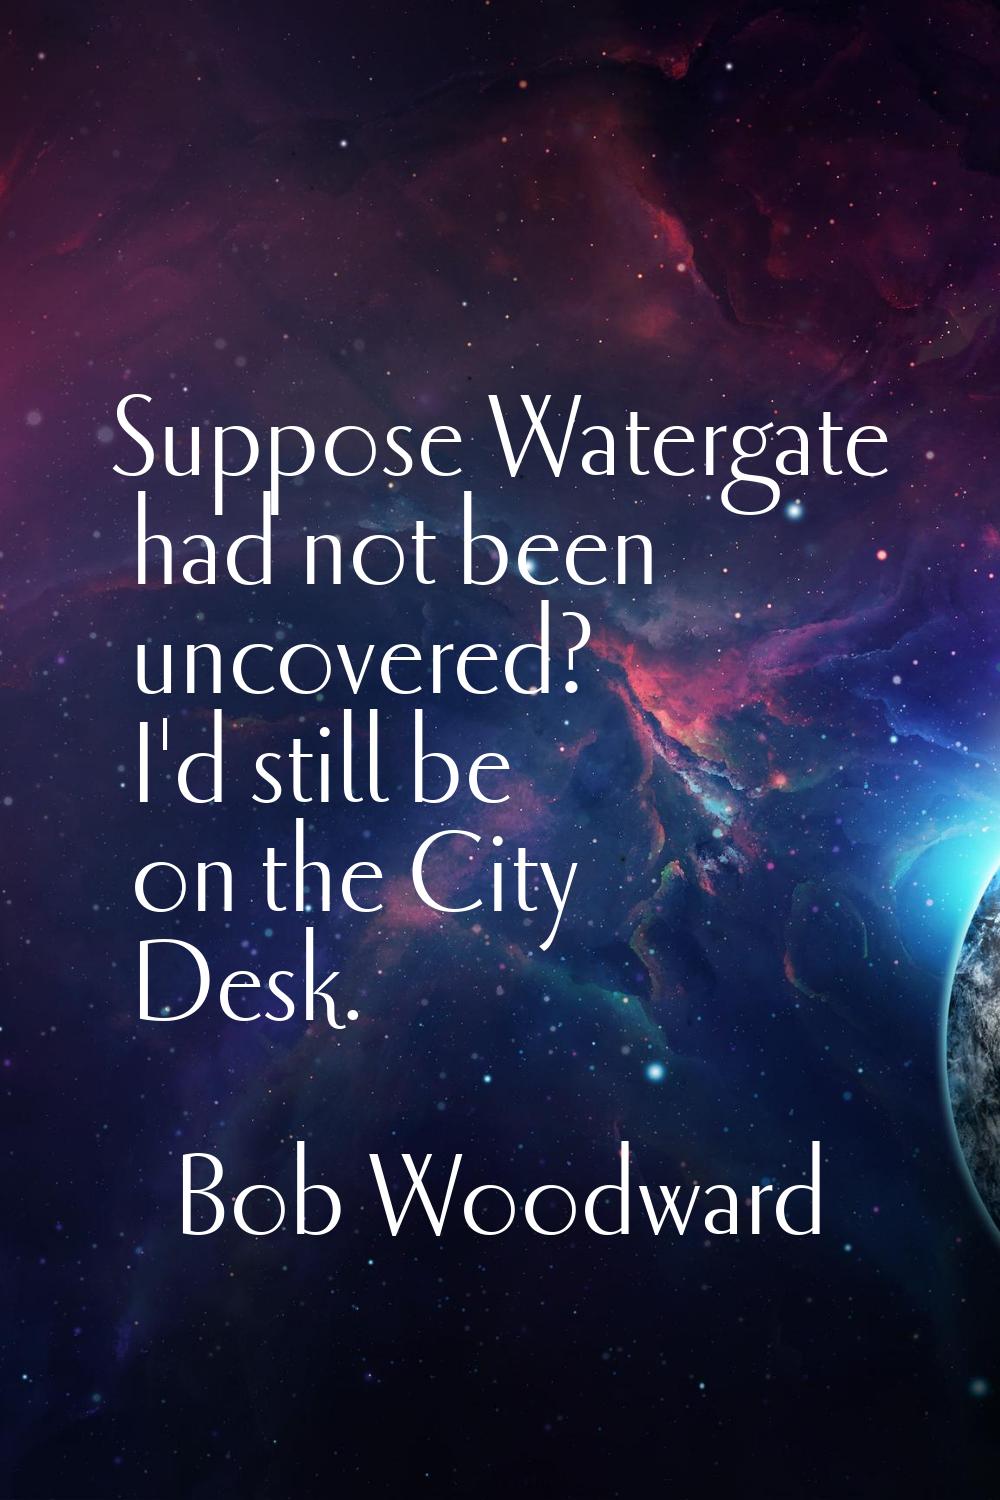 Suppose Watergate had not been uncovered? I'd still be on the City Desk.